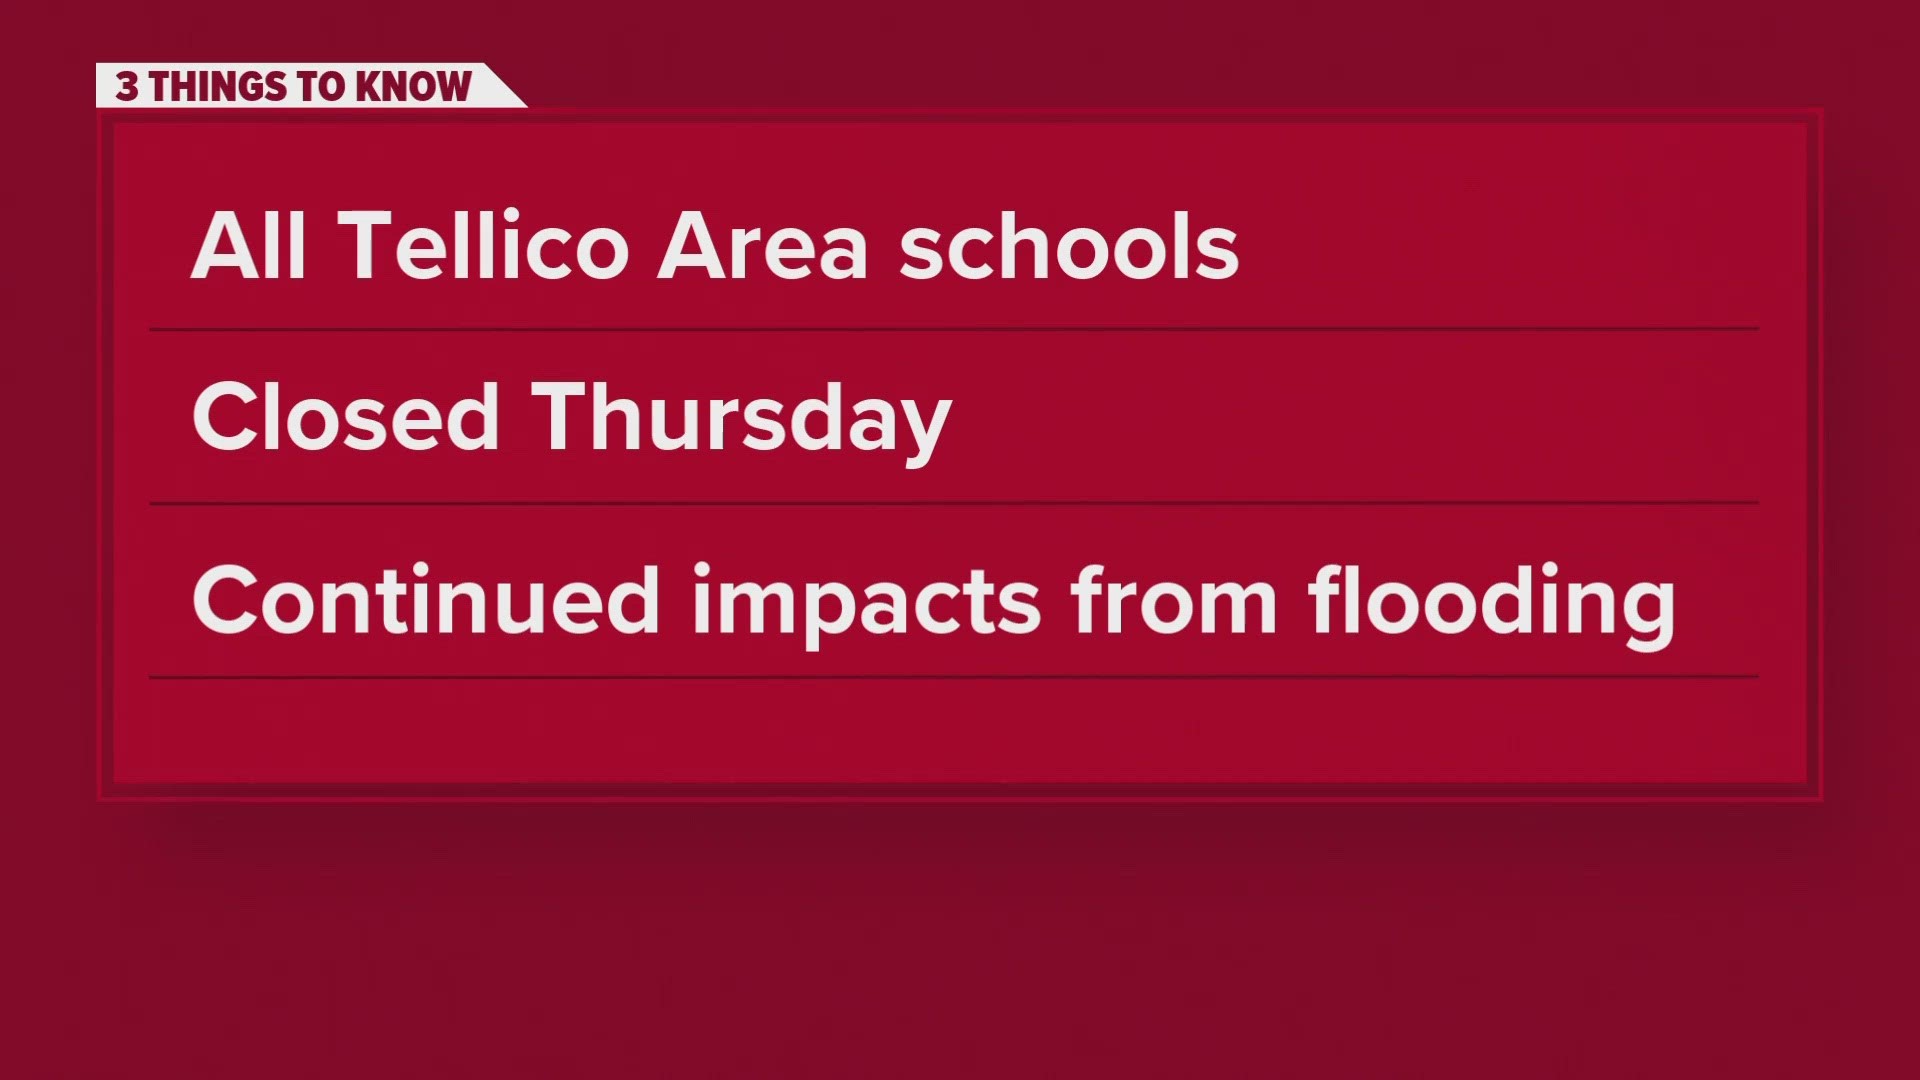 All schools in the Tellico area will be closed on Thursday due to continued impacts from flooding Tuesday.